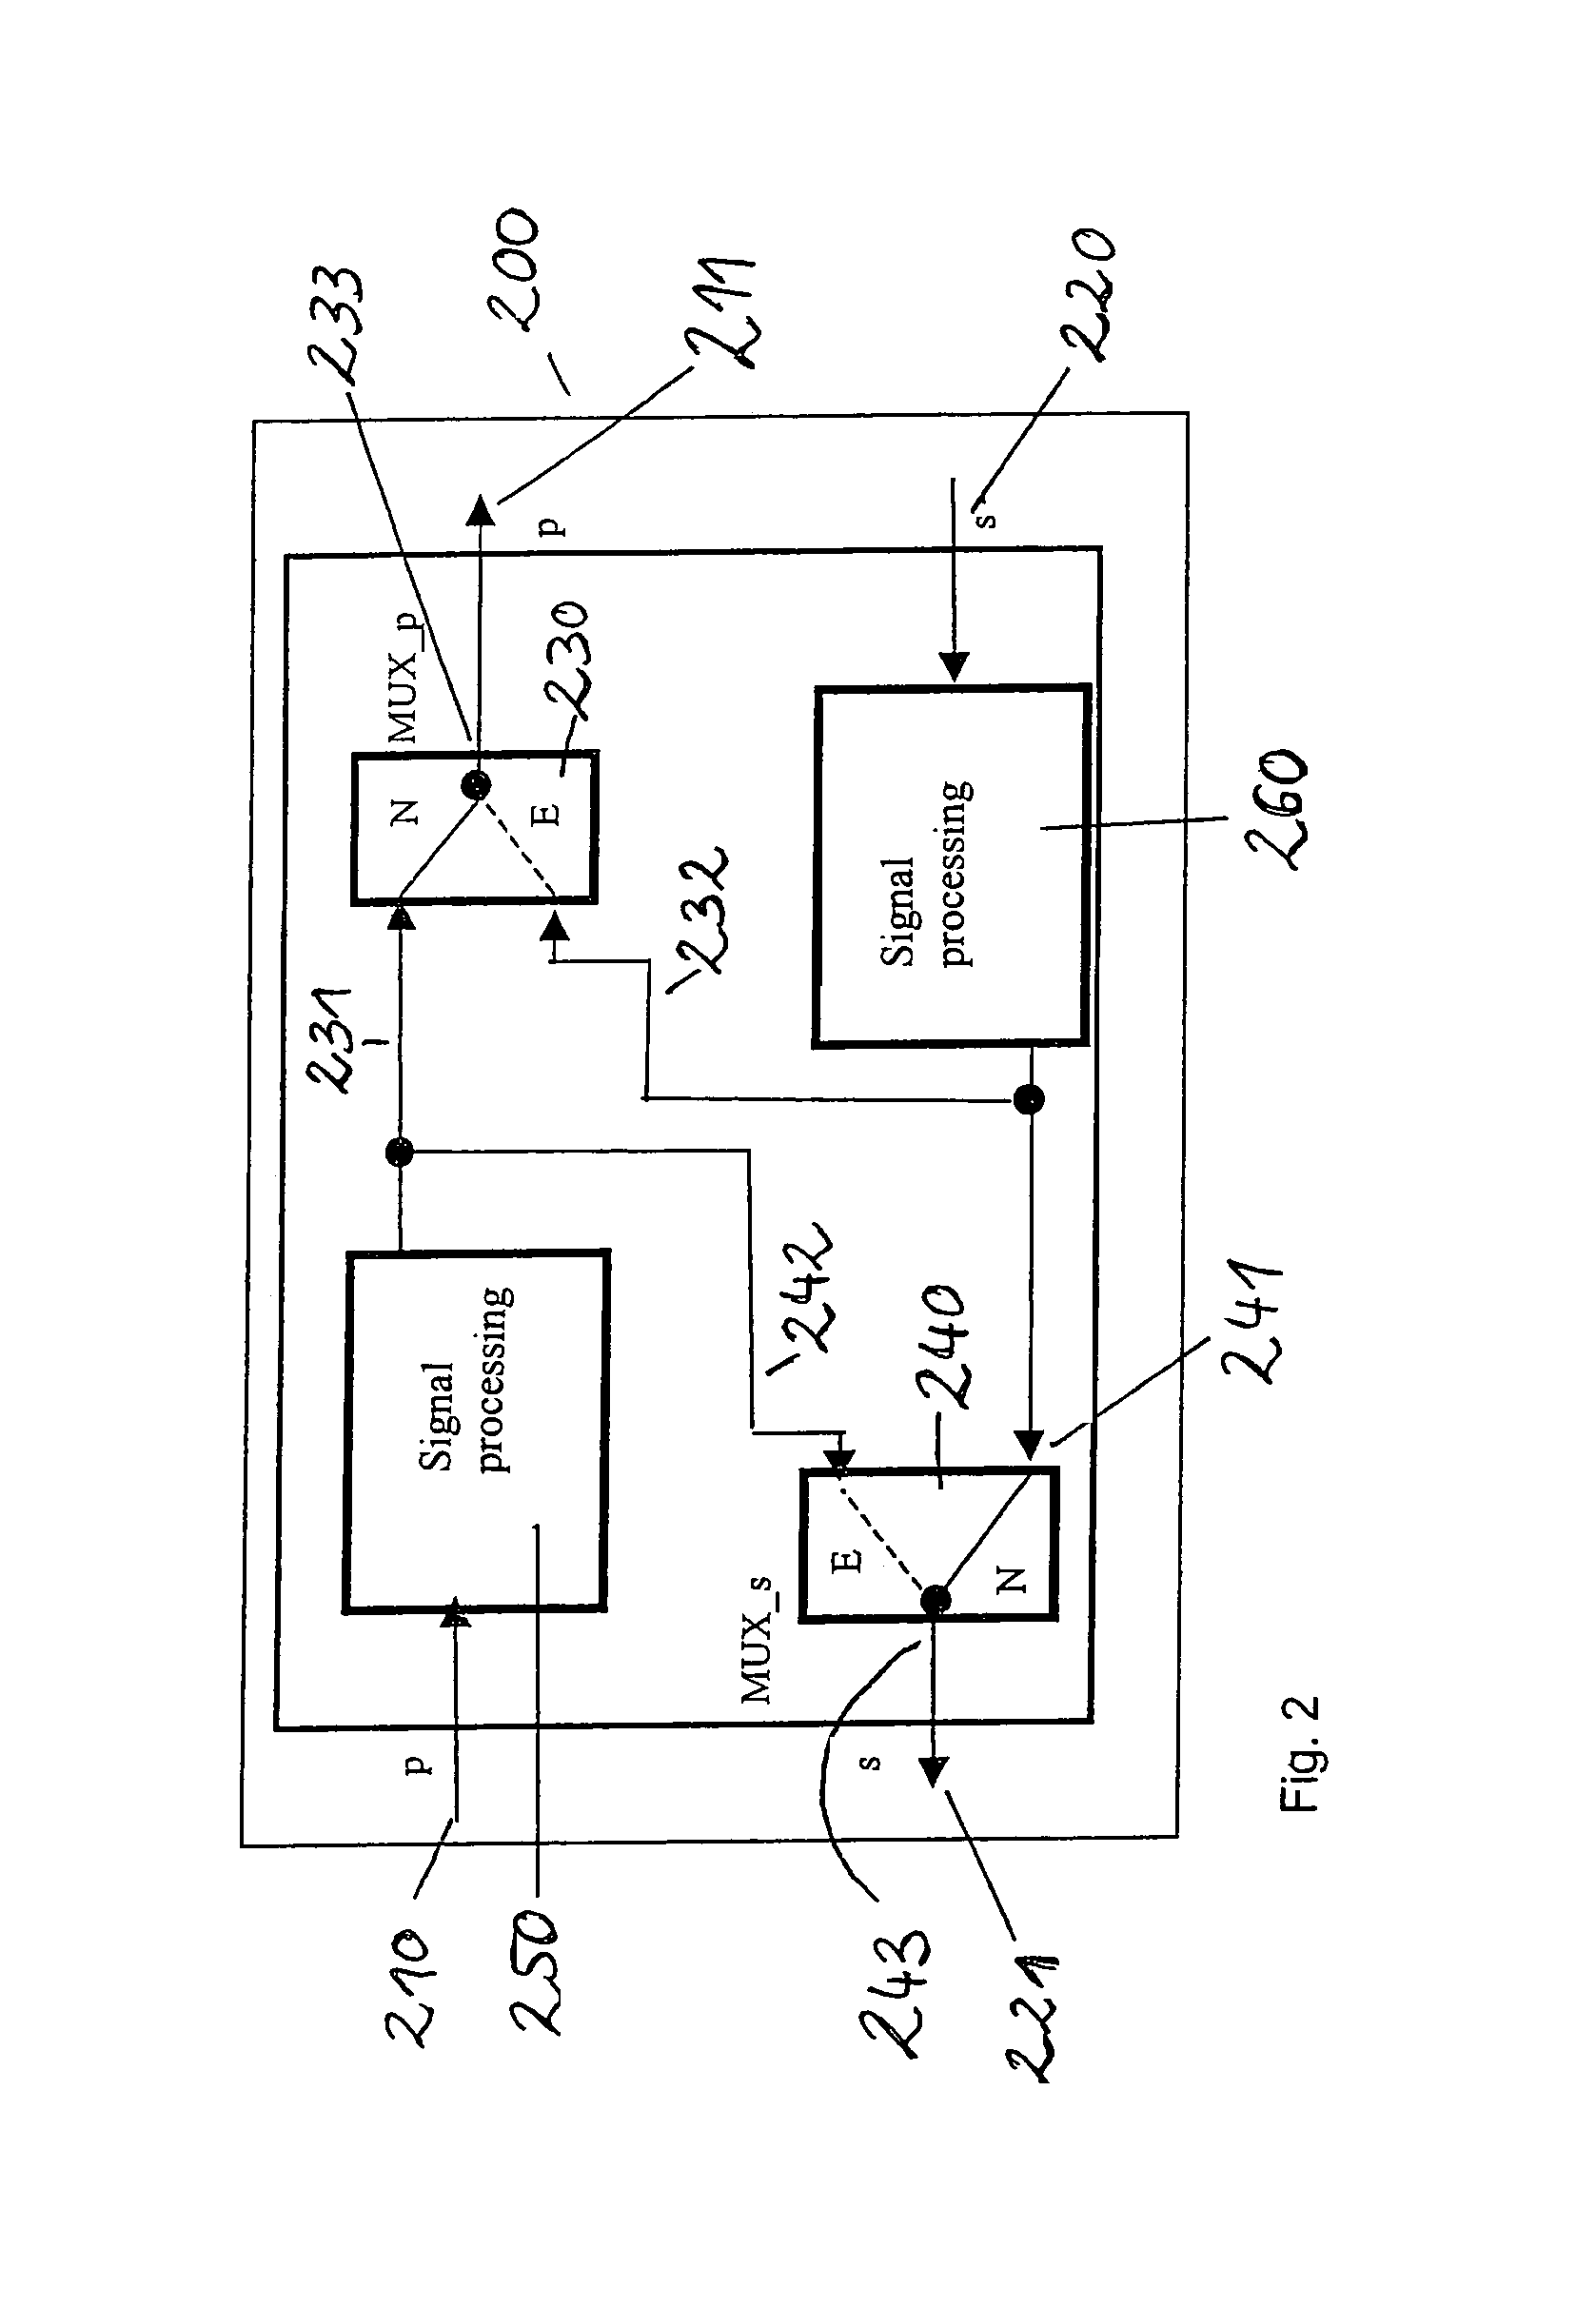 Method for operating a network having a ring topology